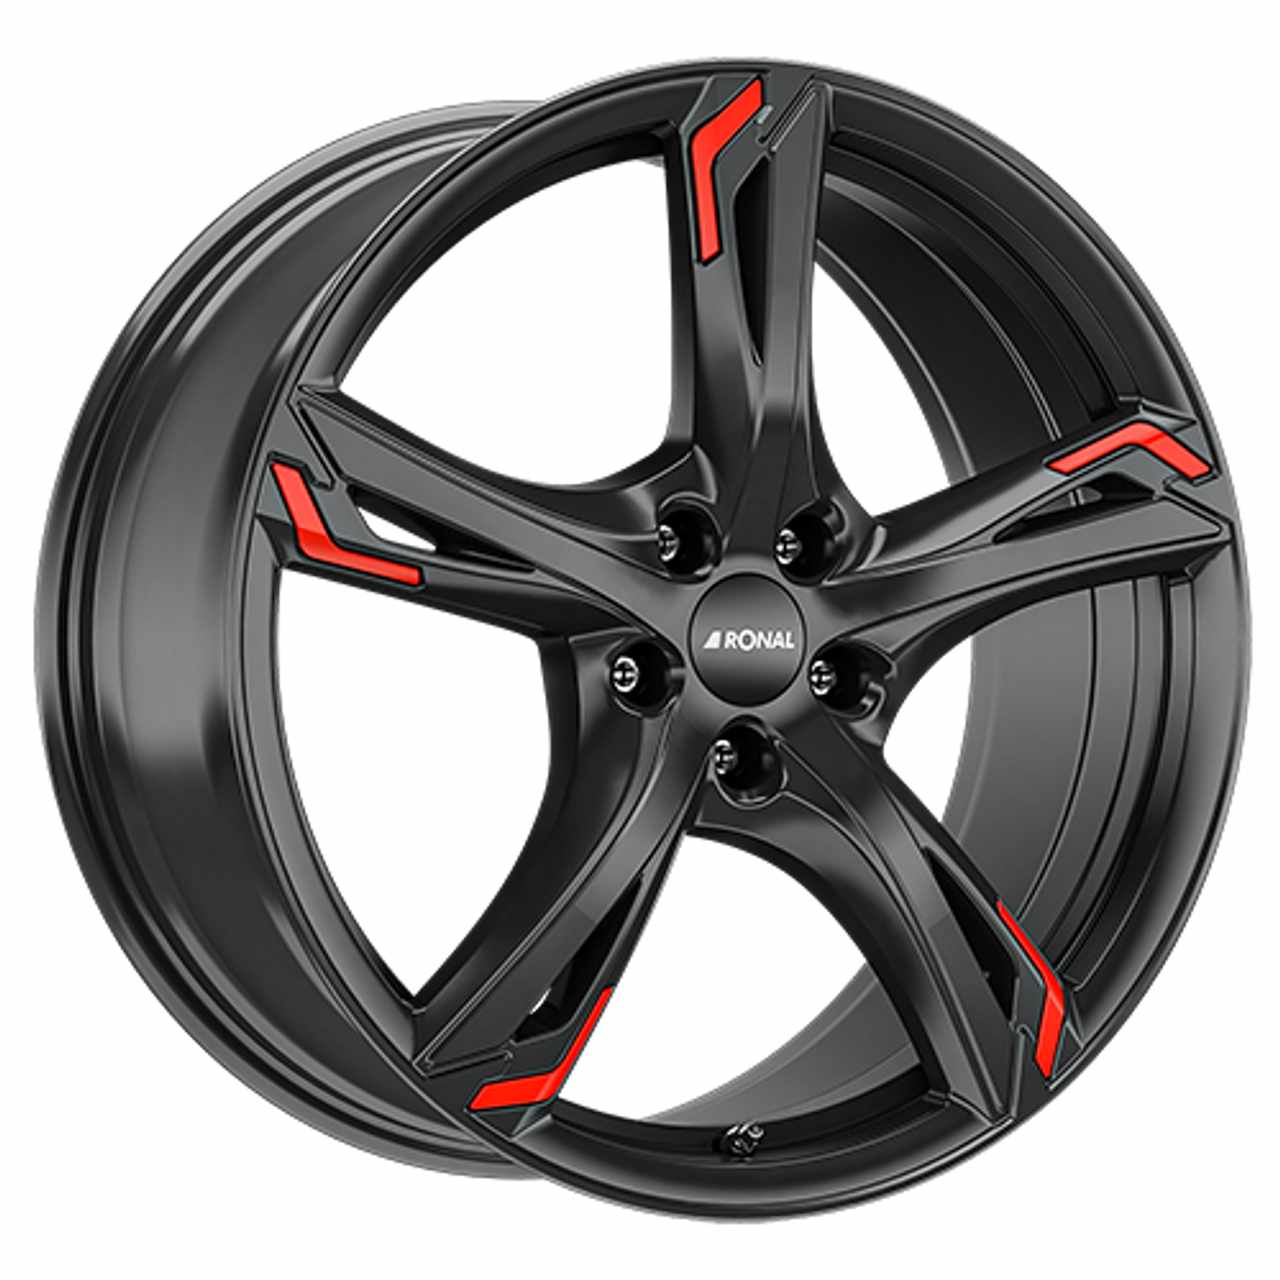 RONAL RONAL R62 RED jetblack 7.5Jx18 5x112 ET45